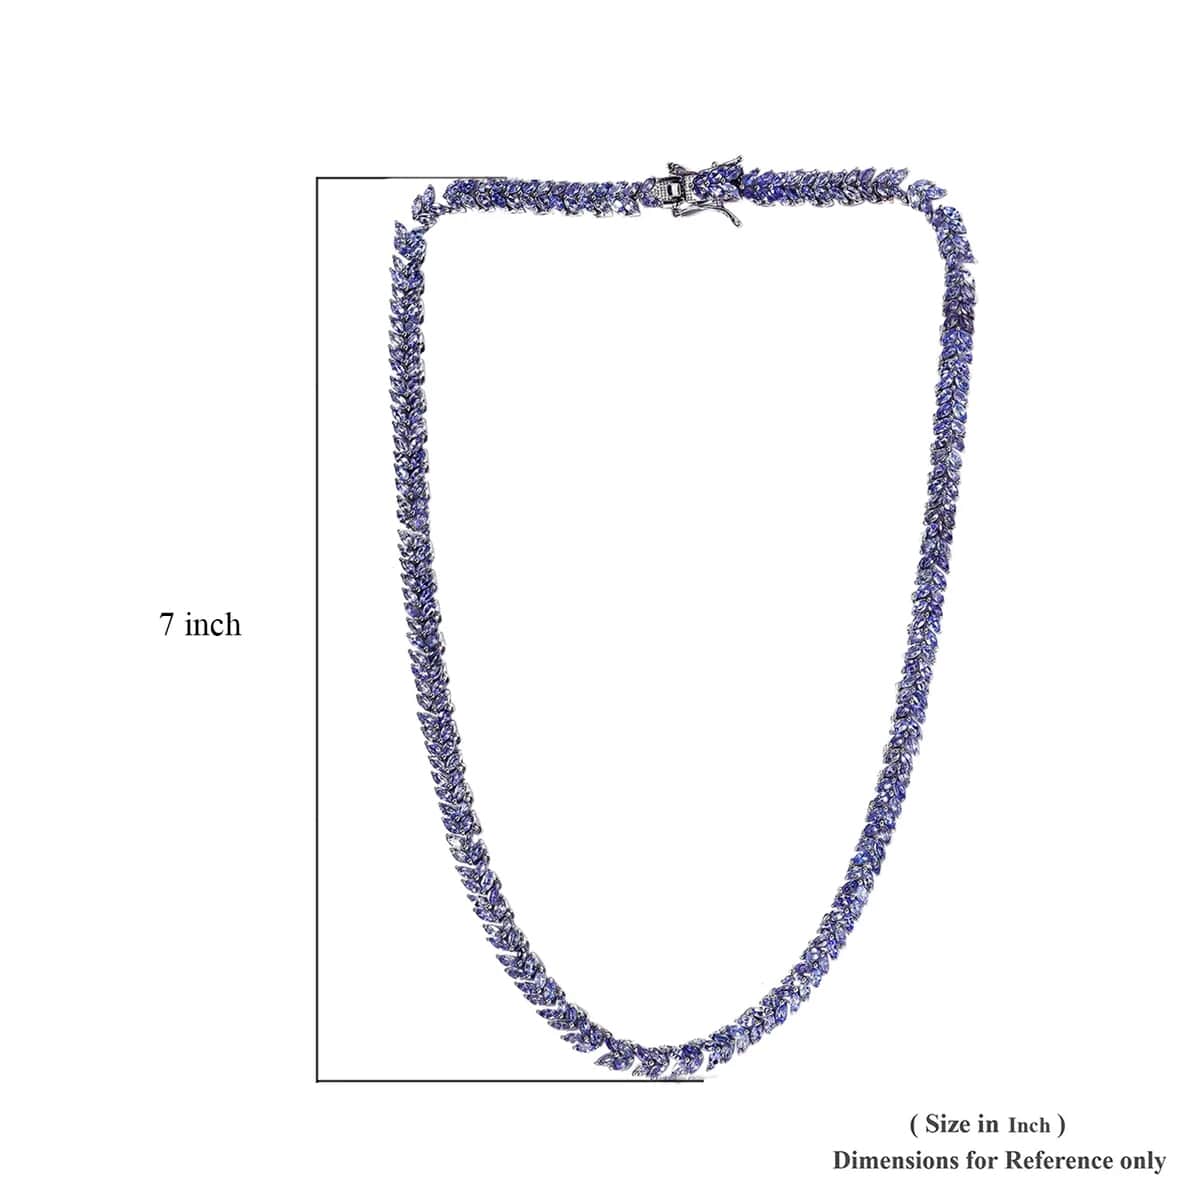 Karis Tanzanite Necklace in Platinum Bond, Double Row Necklace, Tanzanite Jewelry 20.50 ctw (18 Inches) image number 6